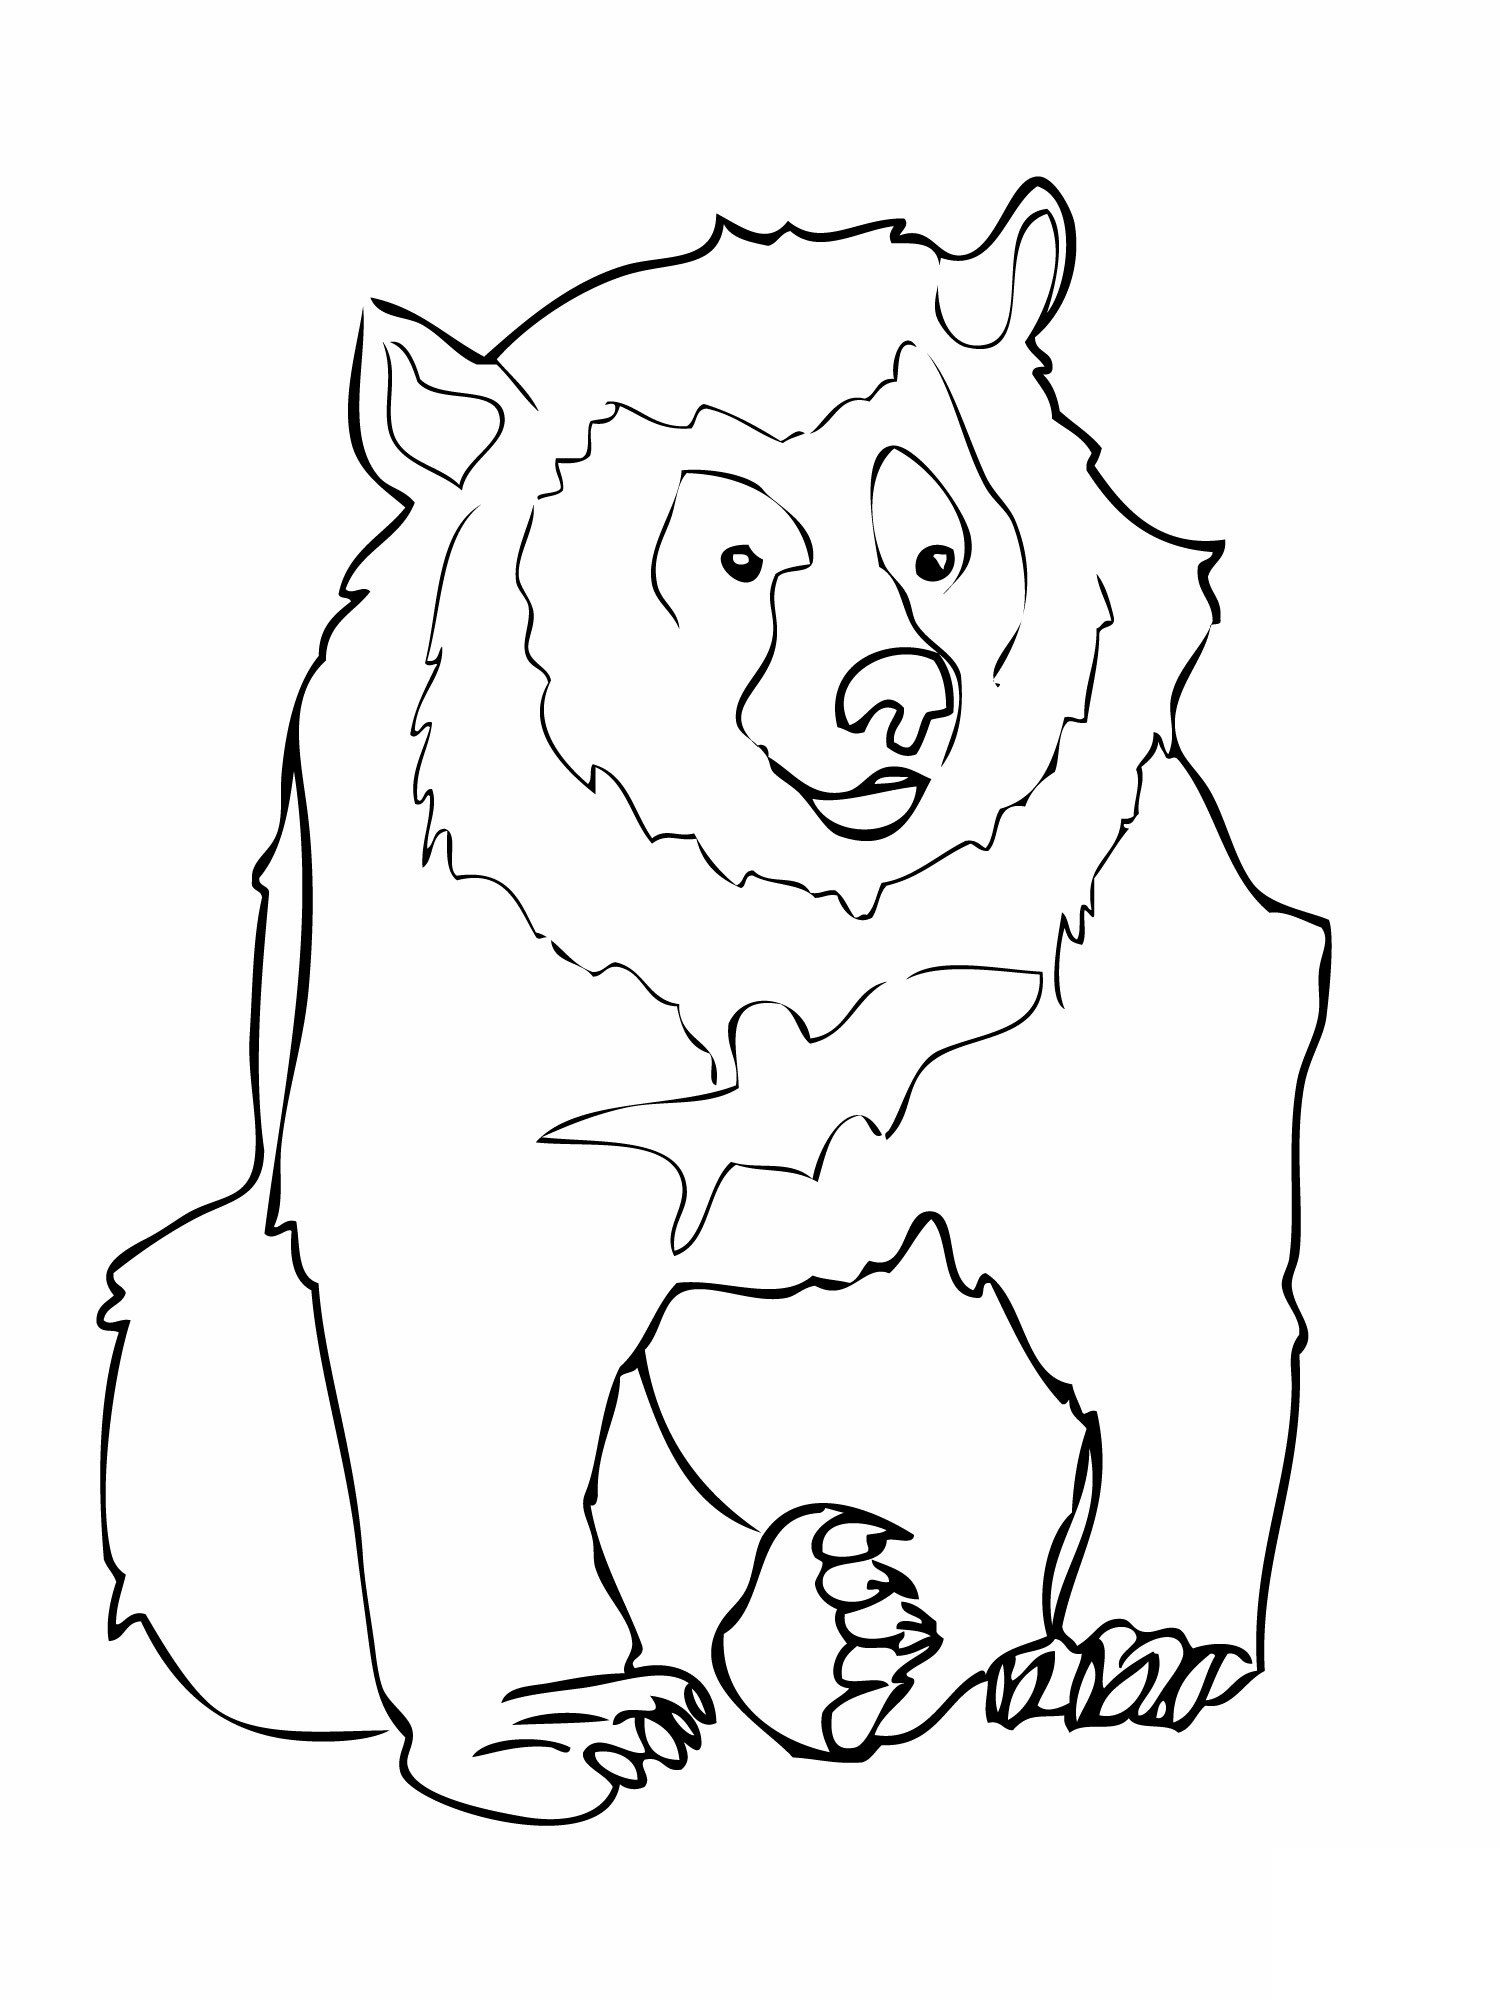 Bear Coloring Pages For Kids
 Free Printable Bear Coloring Pages For Kids